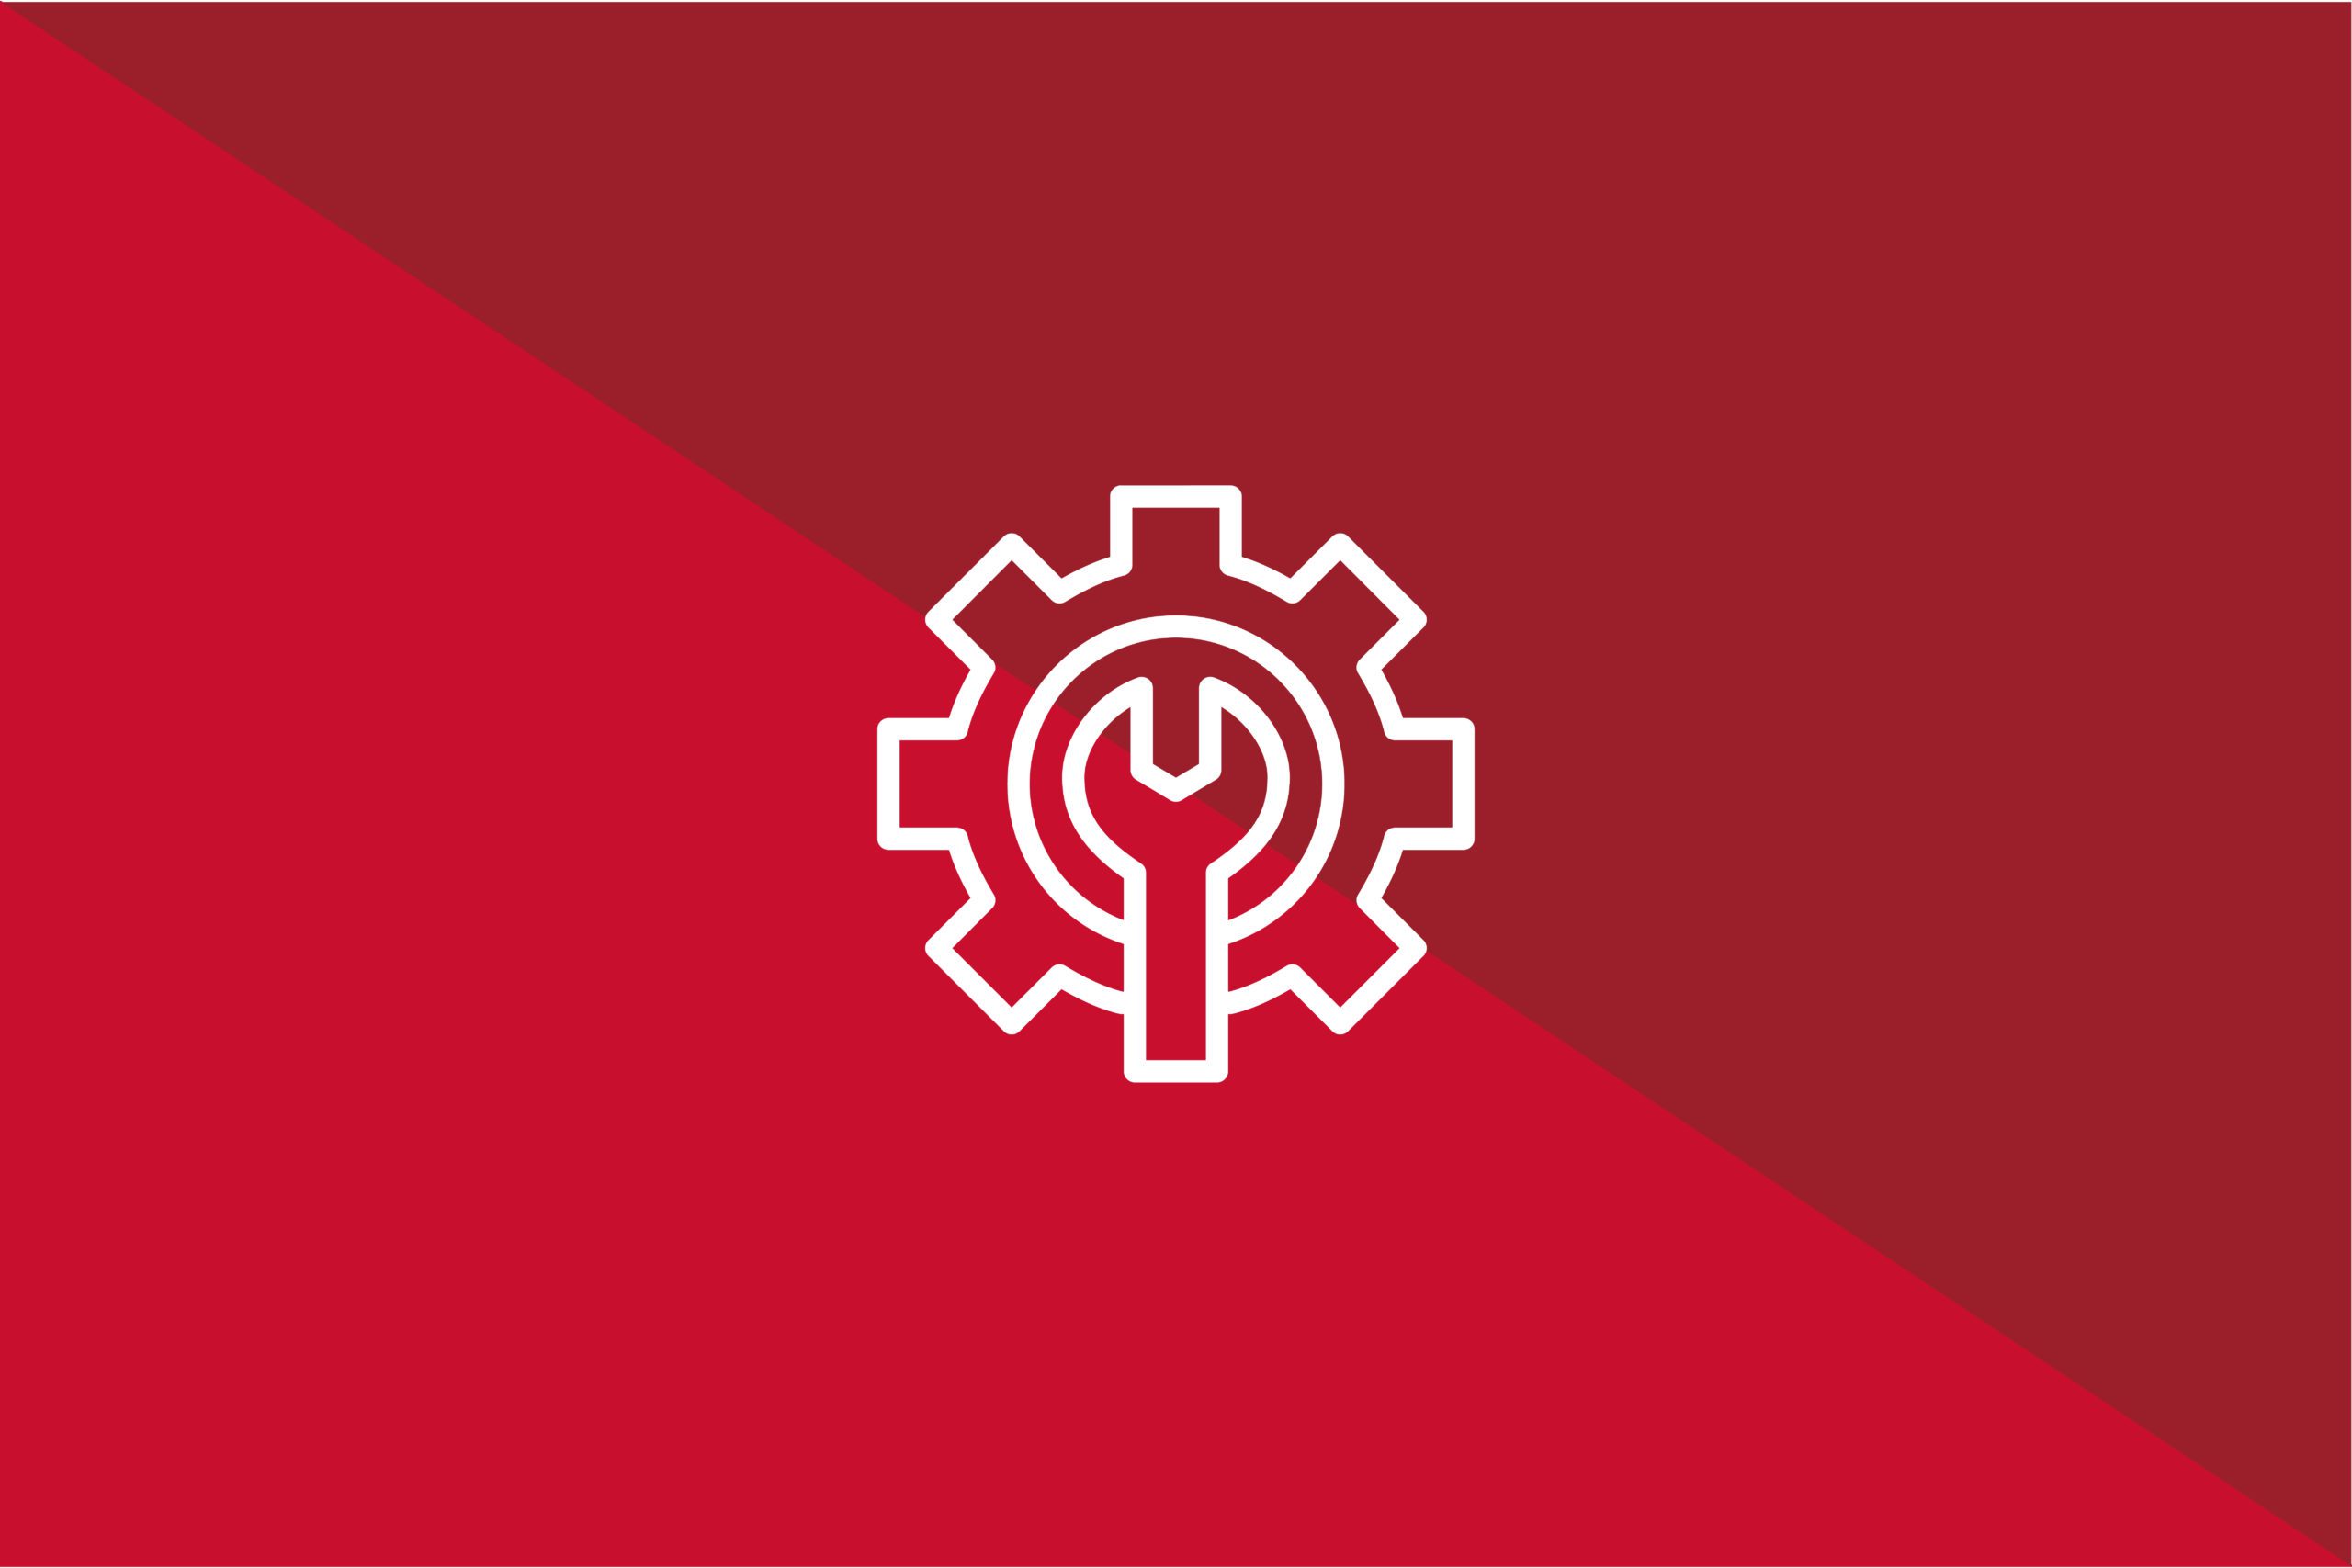 White support and maintenance icon on a red background representing the web design services at ipulse creative agency Hong Kong